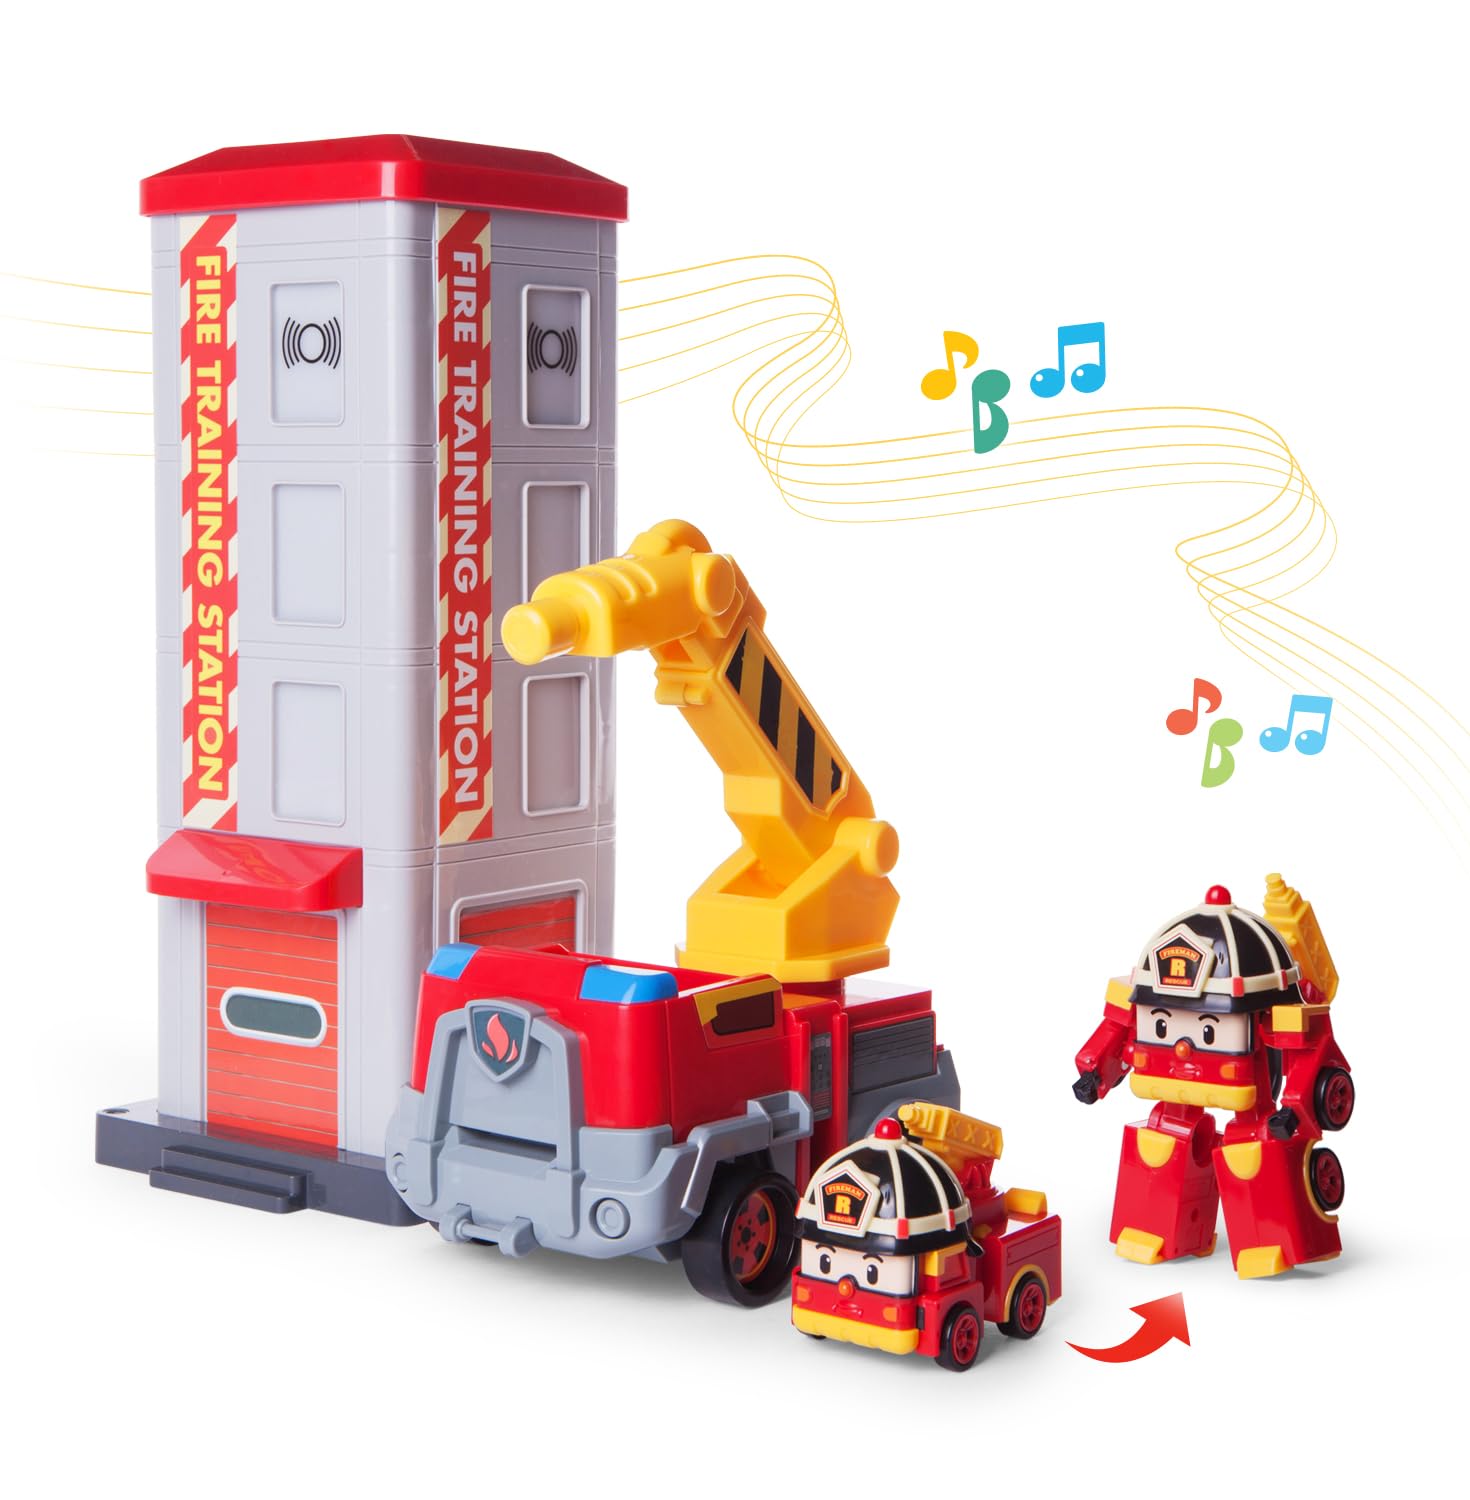 Robocar Poli Toys, Roy Fire Station Playset, Rescue Training Fire Truck Toy Car with Mini Transforming Robot Roy, Tower, Extension Ladder and Flashing Lights & Siren Sounds